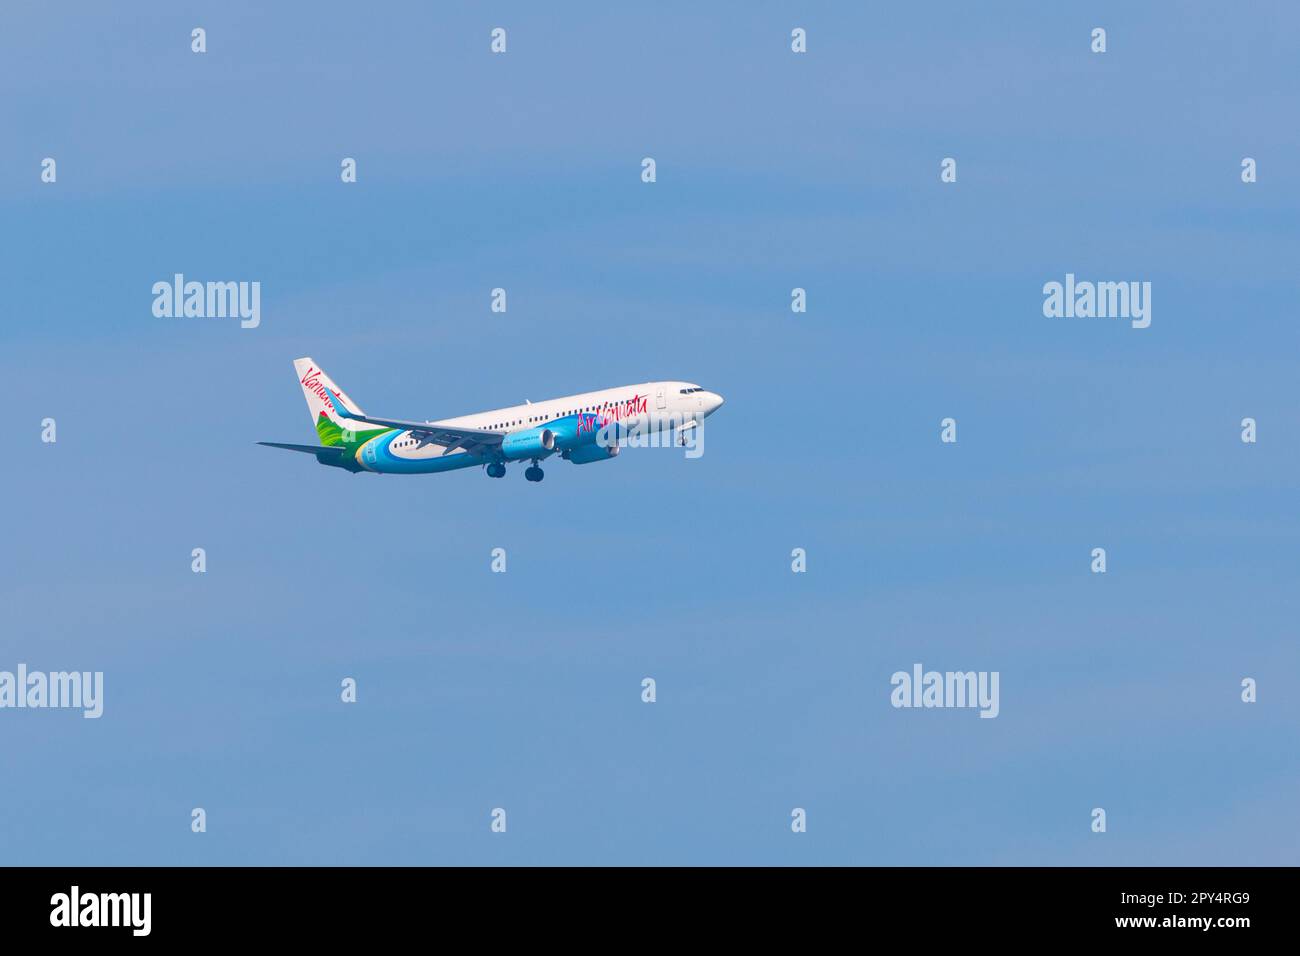 Aircraft movements at Sydney (Kingsford Smith) Airport in Sydney, Australia. Pictured: an Air Vanuatu jet approaching Sydney Airport. Stock Photo